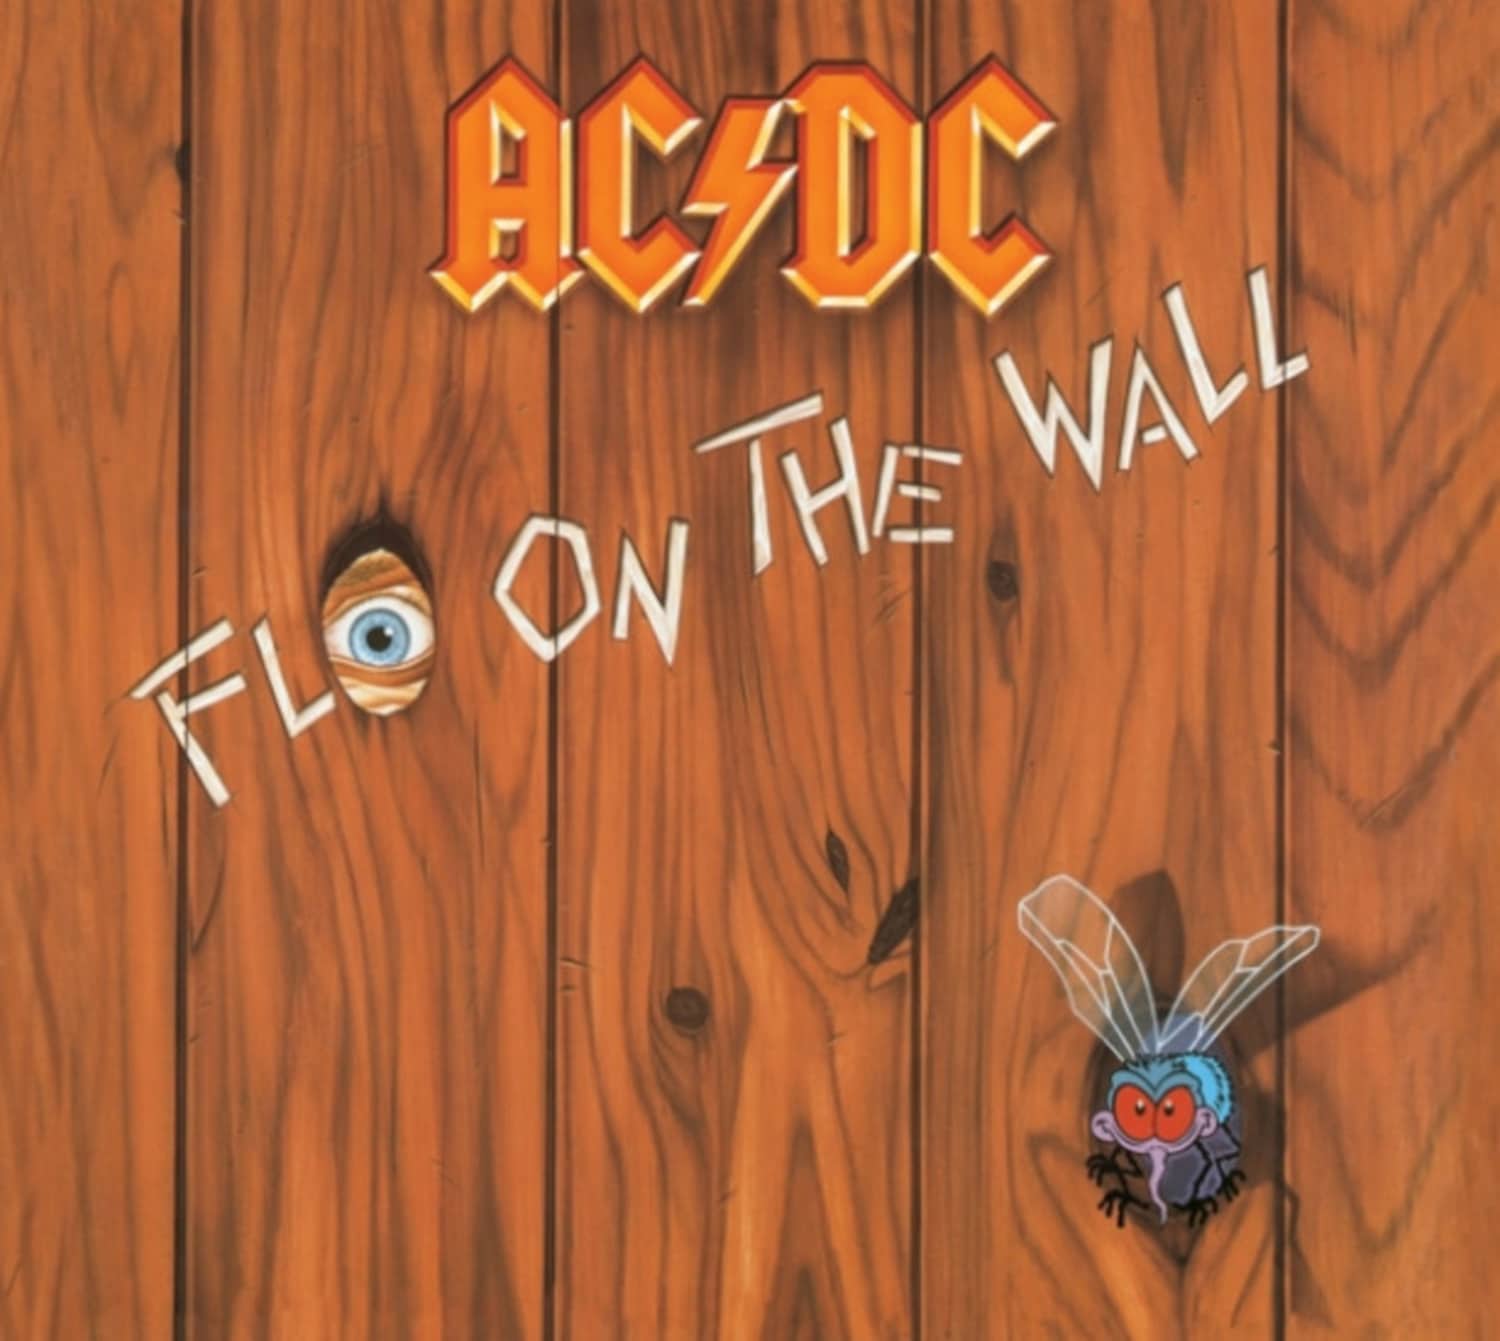 AC/DC - FLY ON THE WALL 